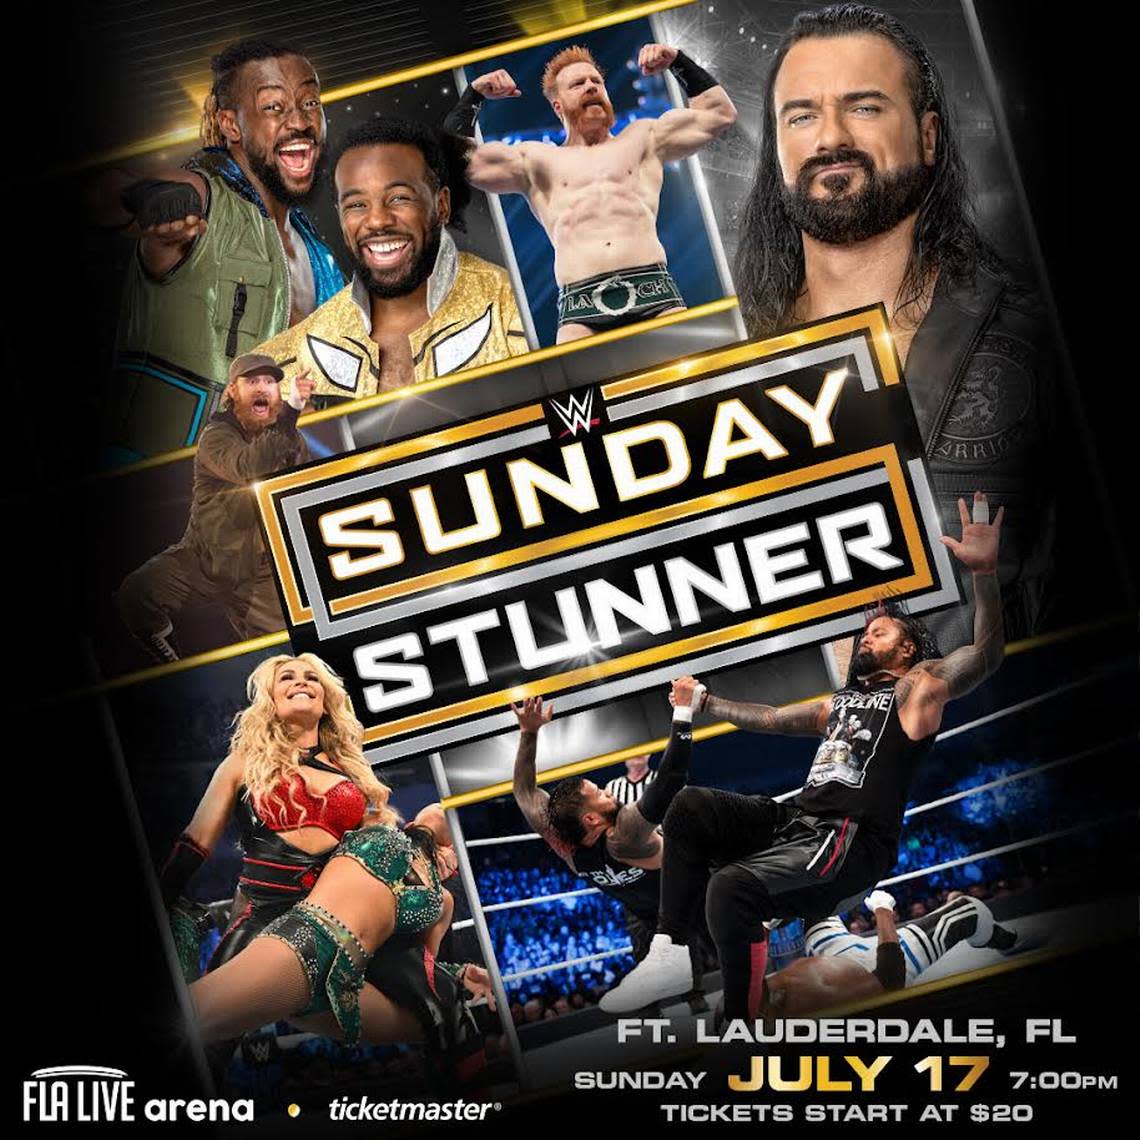 WWE Sunday Stunner (SmackDown style) on Sunday, July 17 at the FLA Live Arena, home of the NHL Florida Panthers in Sunrise/Fort Lauderdale.